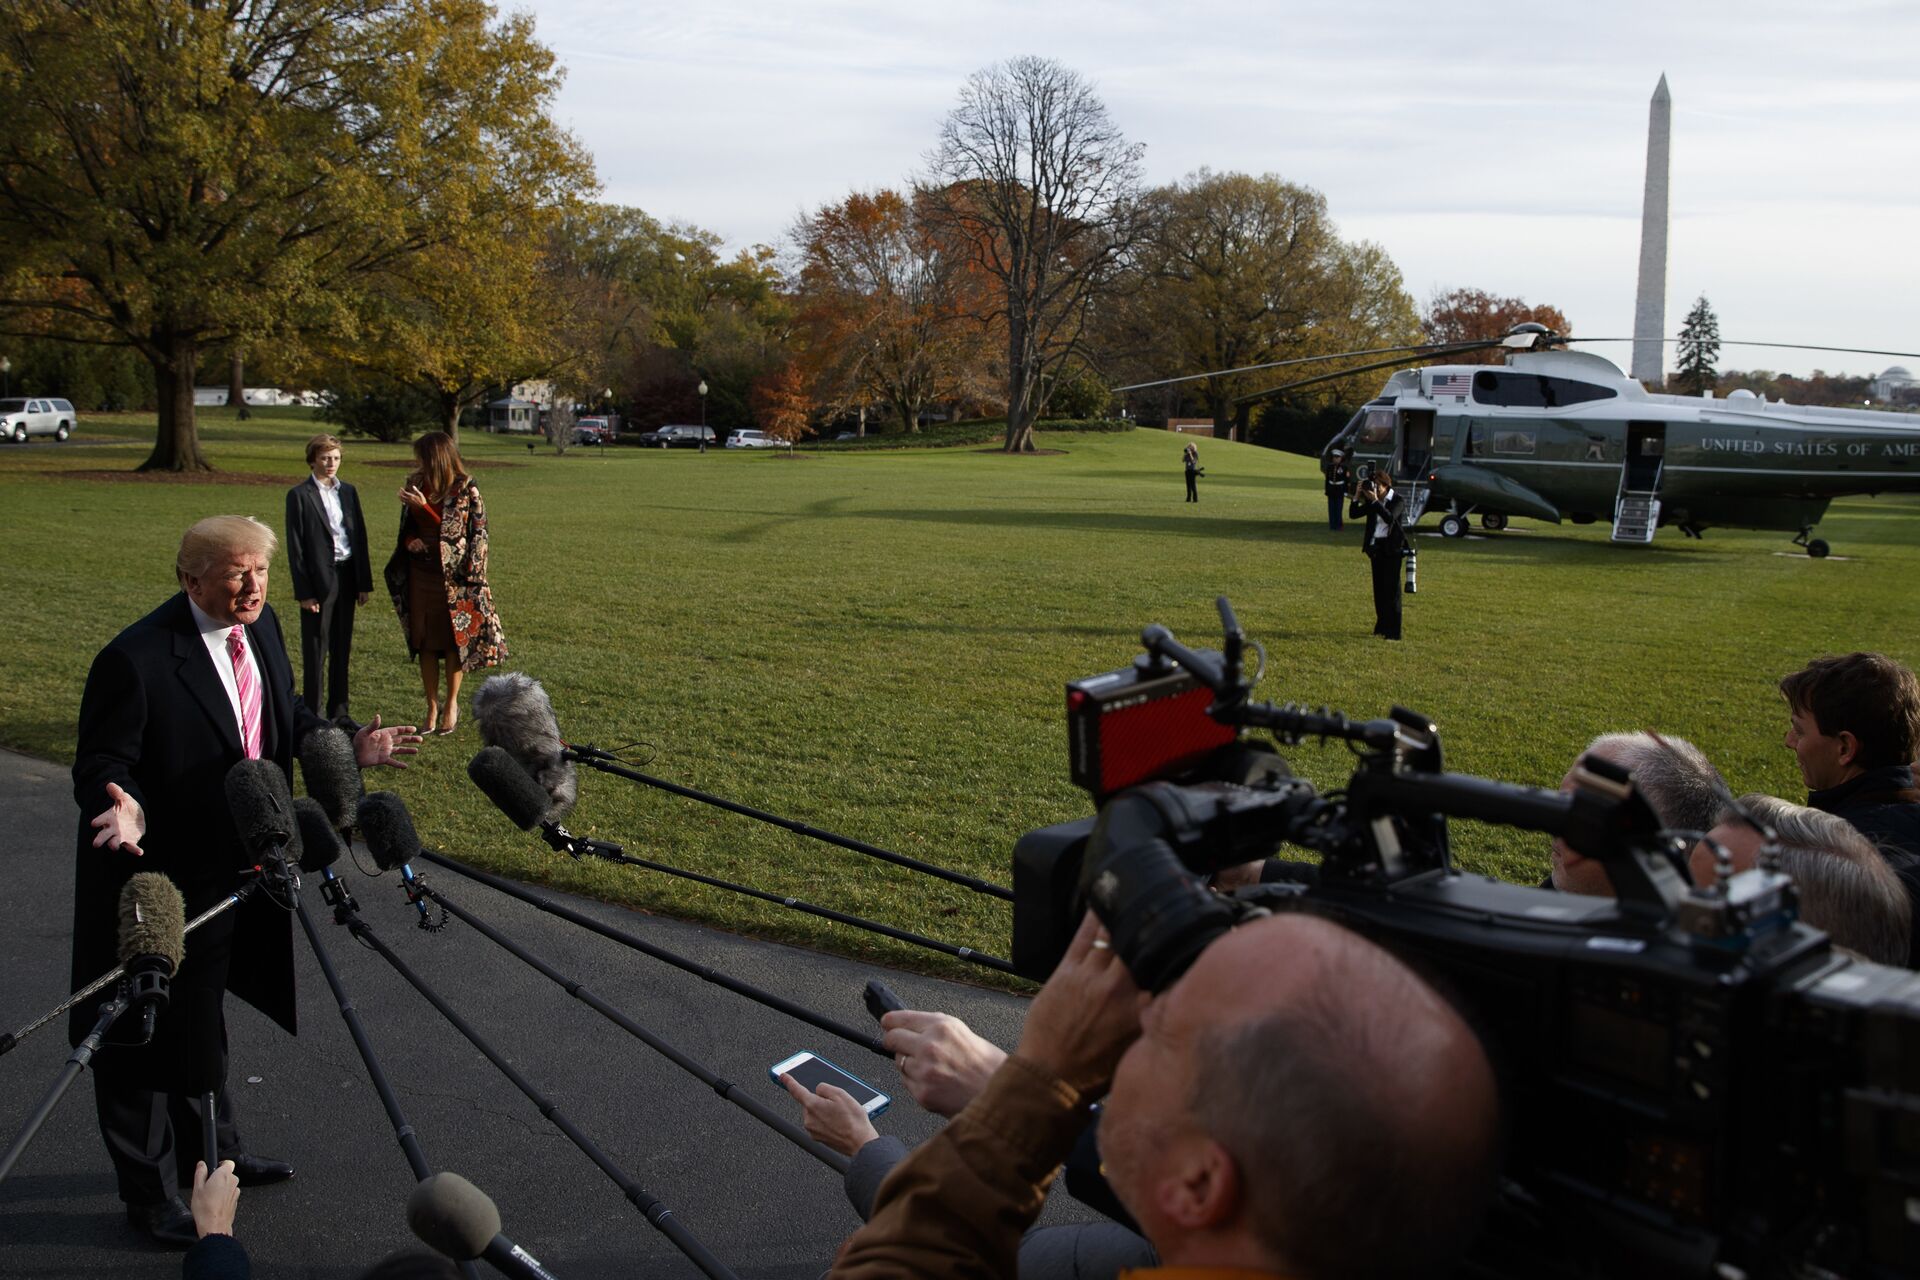 President Donald Trump speaks to reporters before leaving the White House, Tuesday, Nov. 21, 2017, in Washington for a Thanksgiving trip to Mar-a-Lago estate in Palm Beach, Fla. - Sputnik International, 1920, 22.09.2021